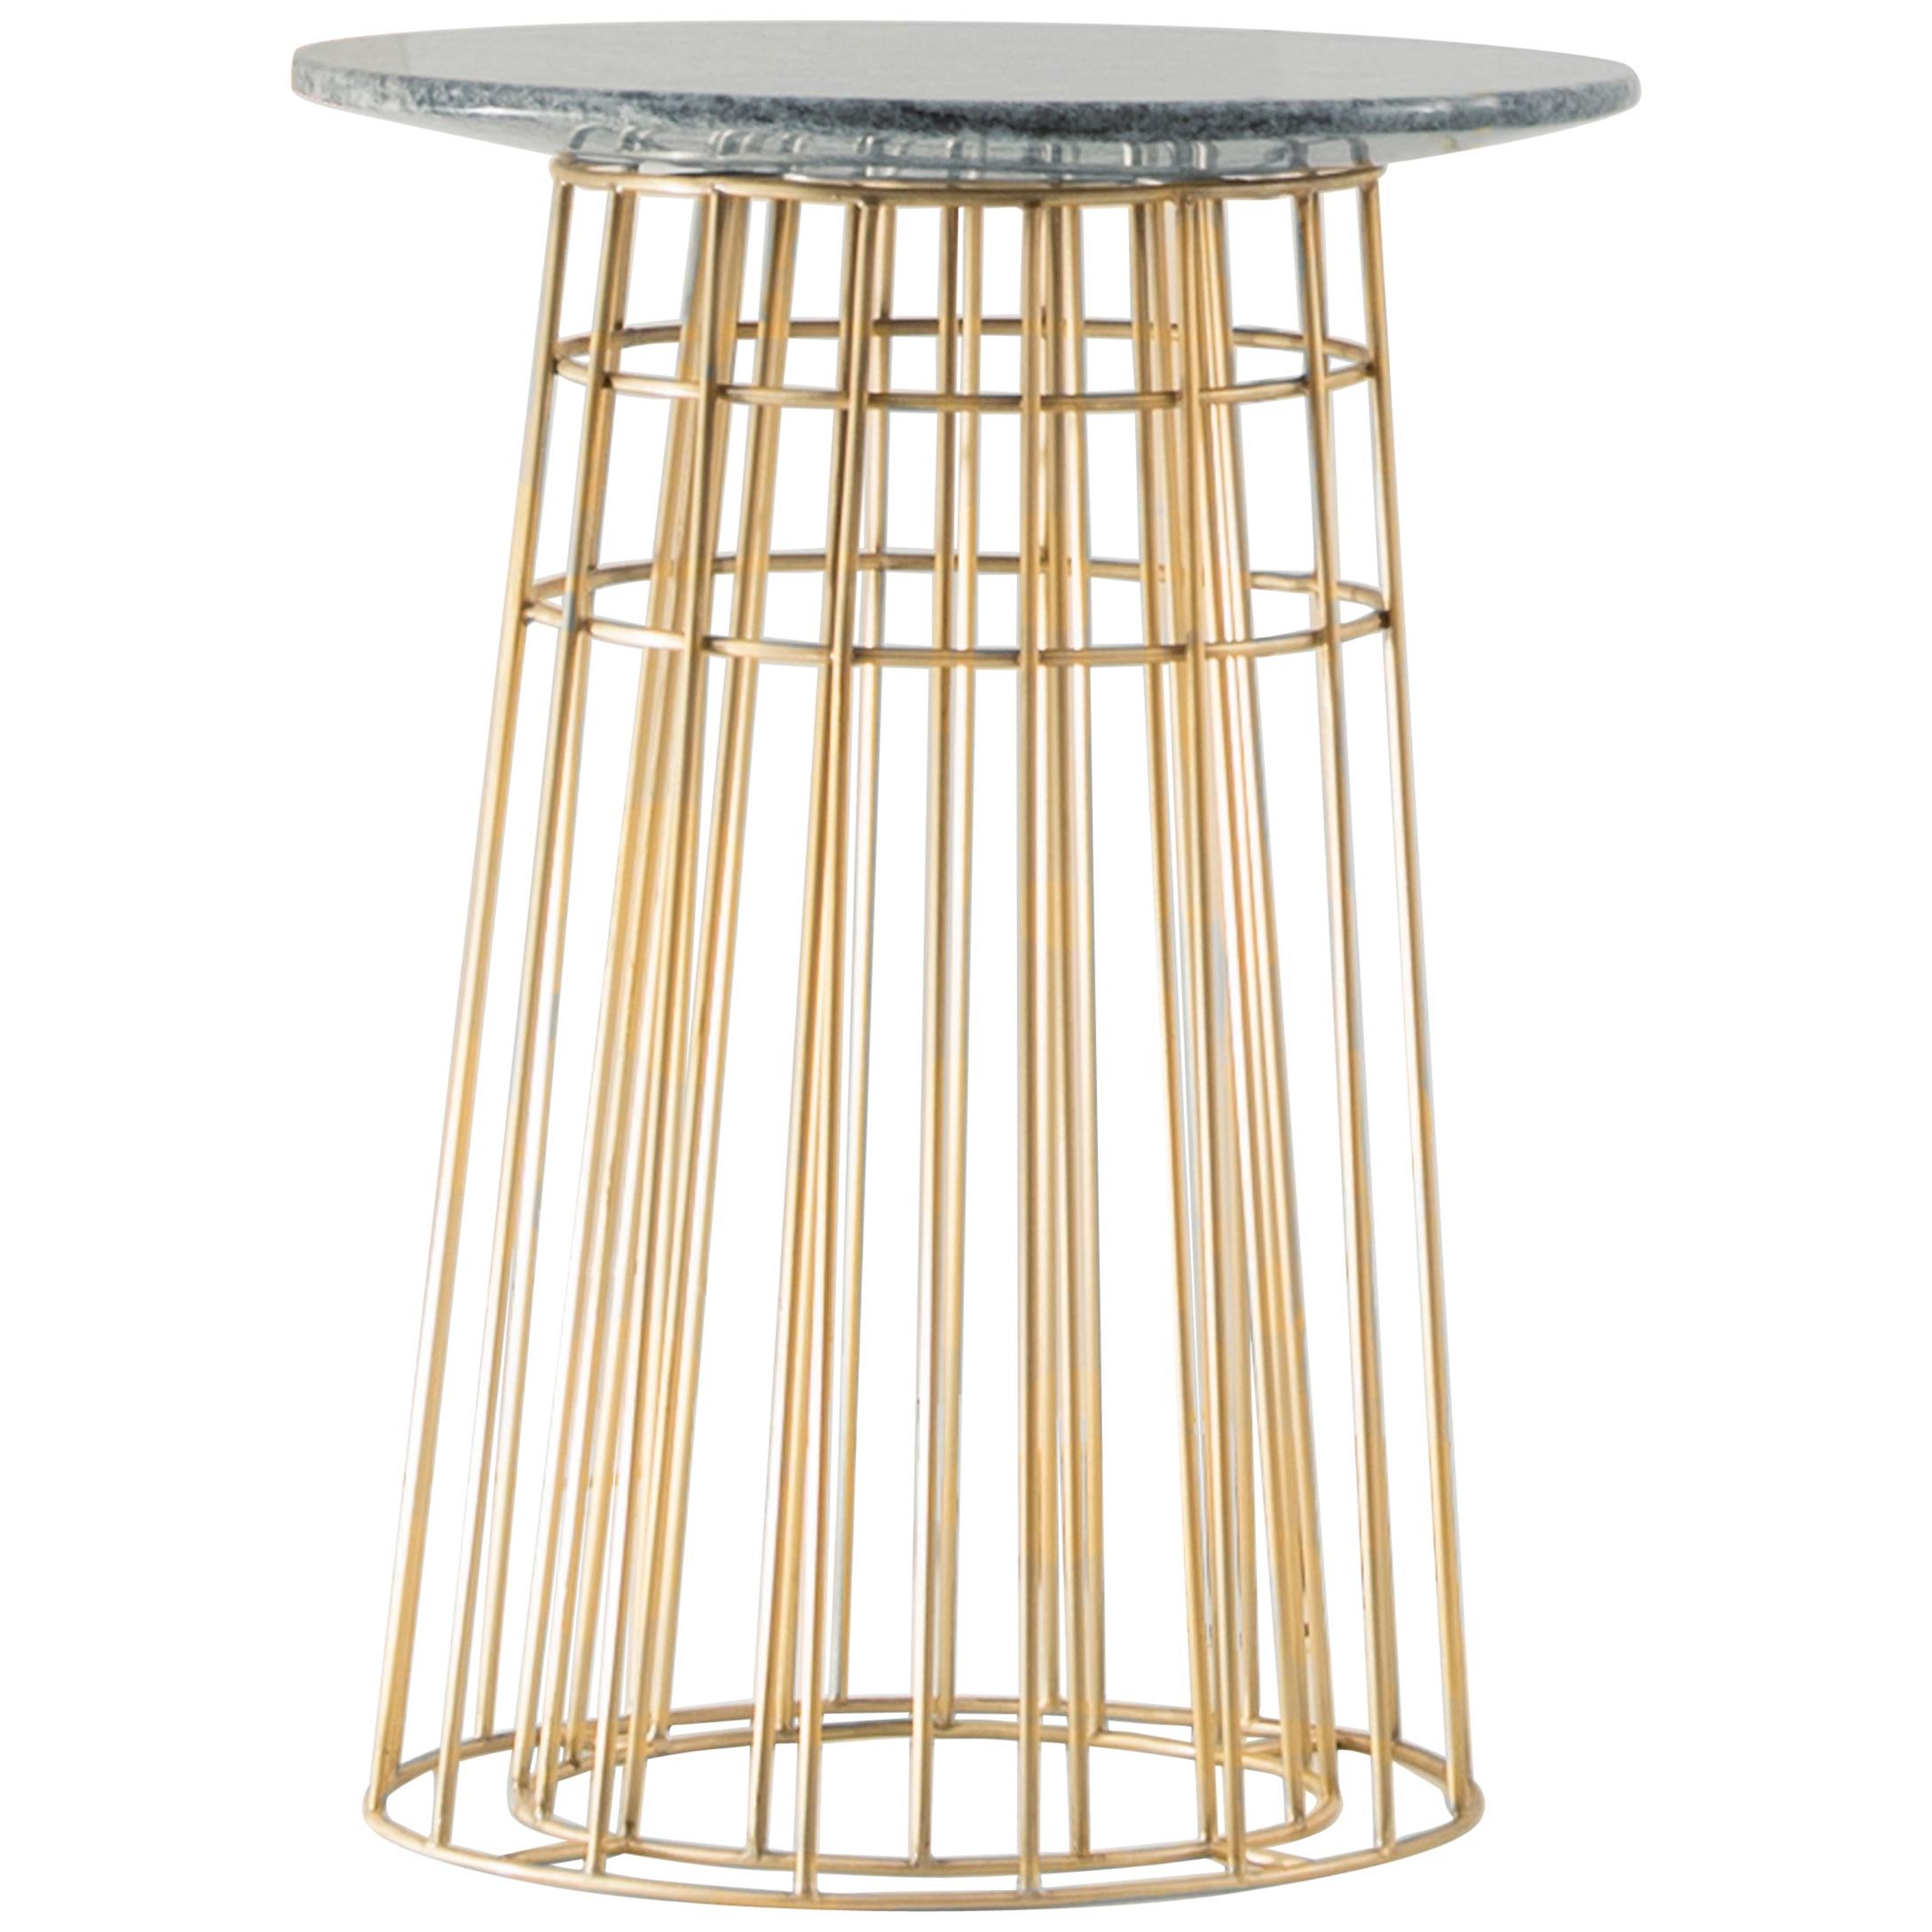 Contemporary Side Table or Tray Table in Granite and Brass